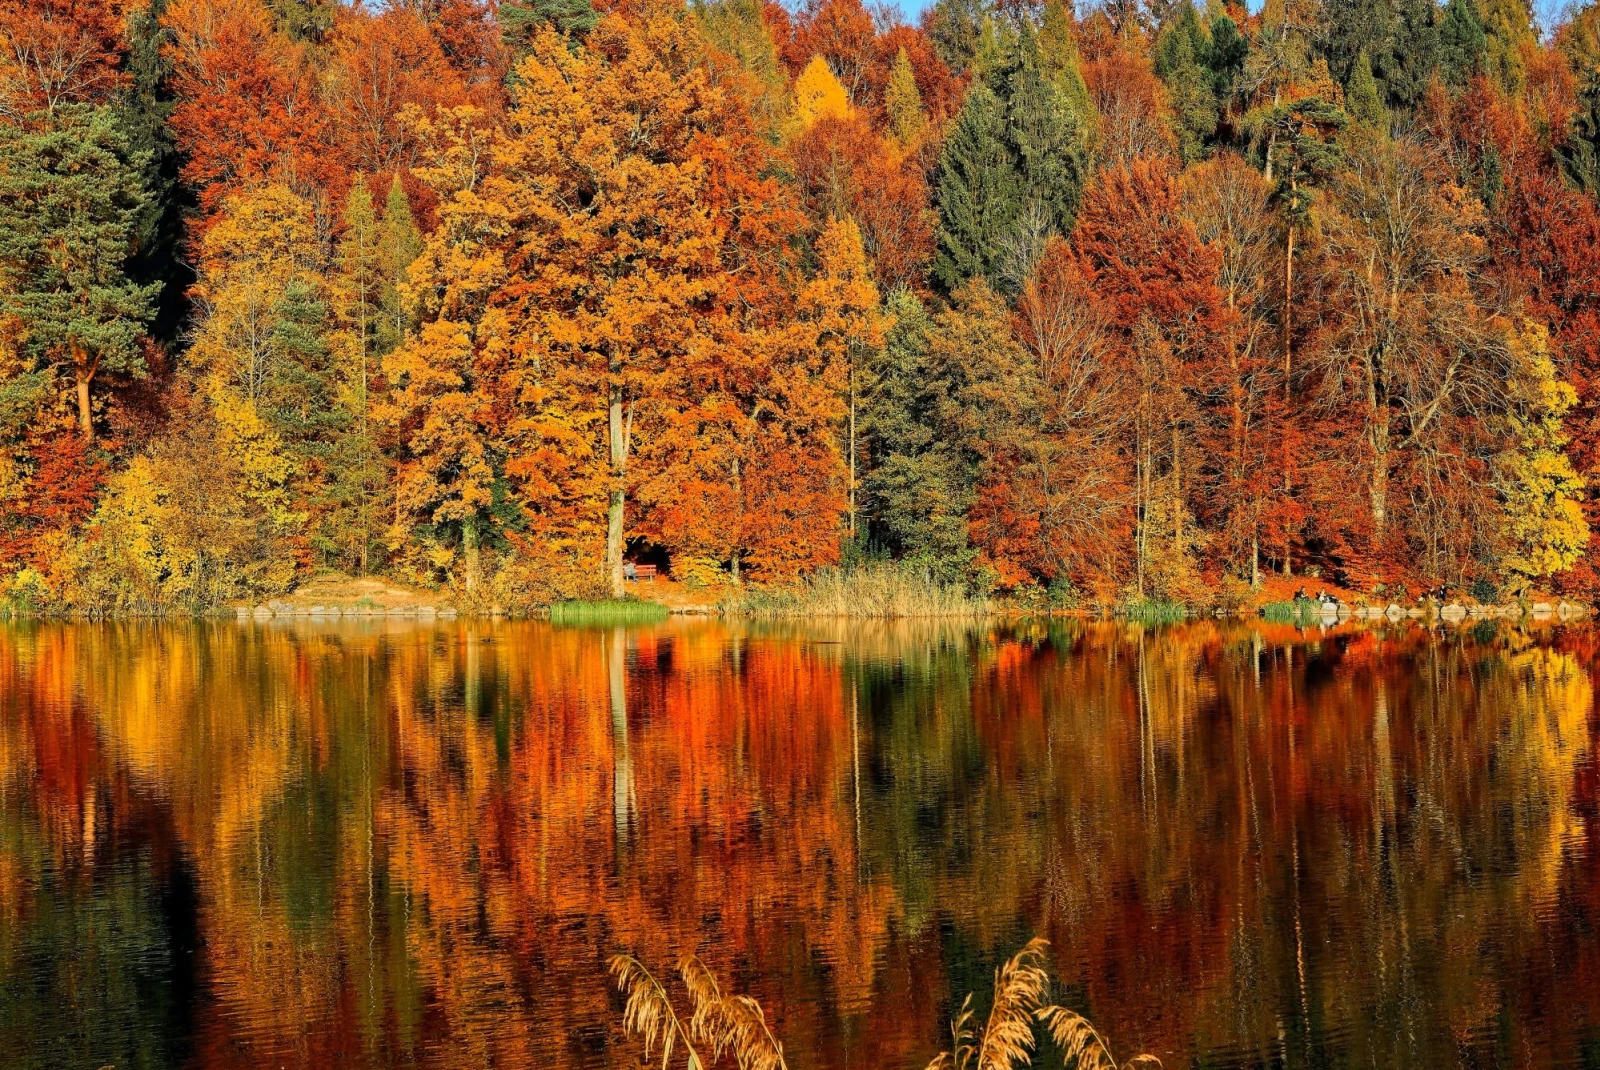 Lake surrounded by Fall trees. 